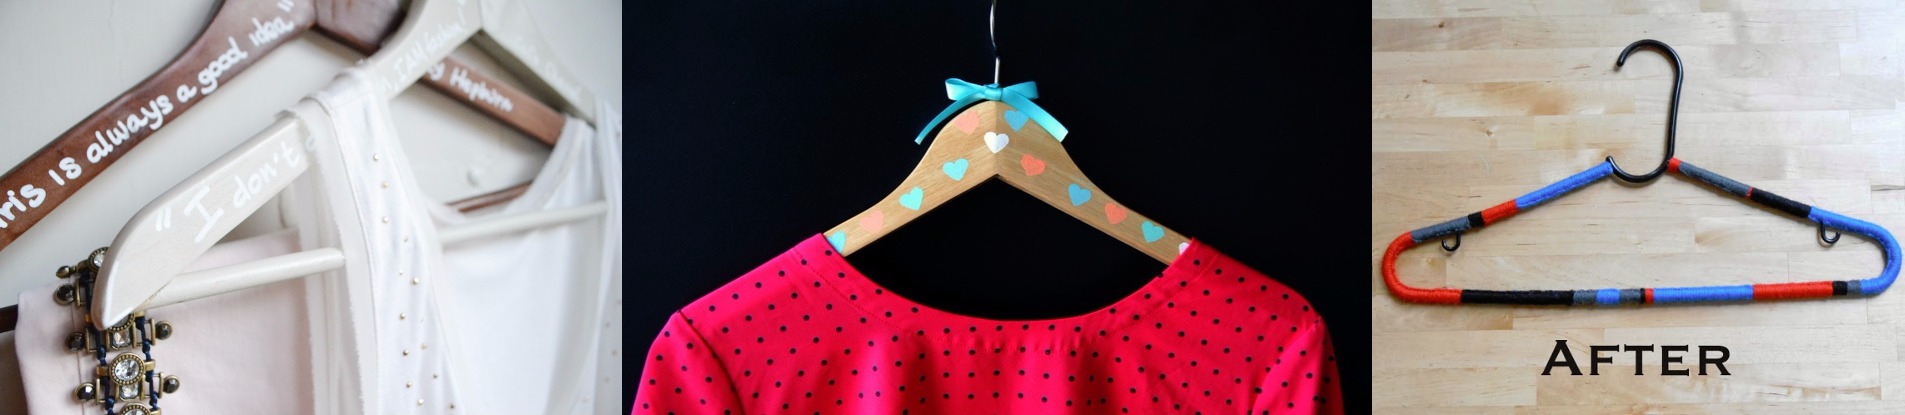 10 DIY Clothes Hanger Tutorials You Never Want To Miss